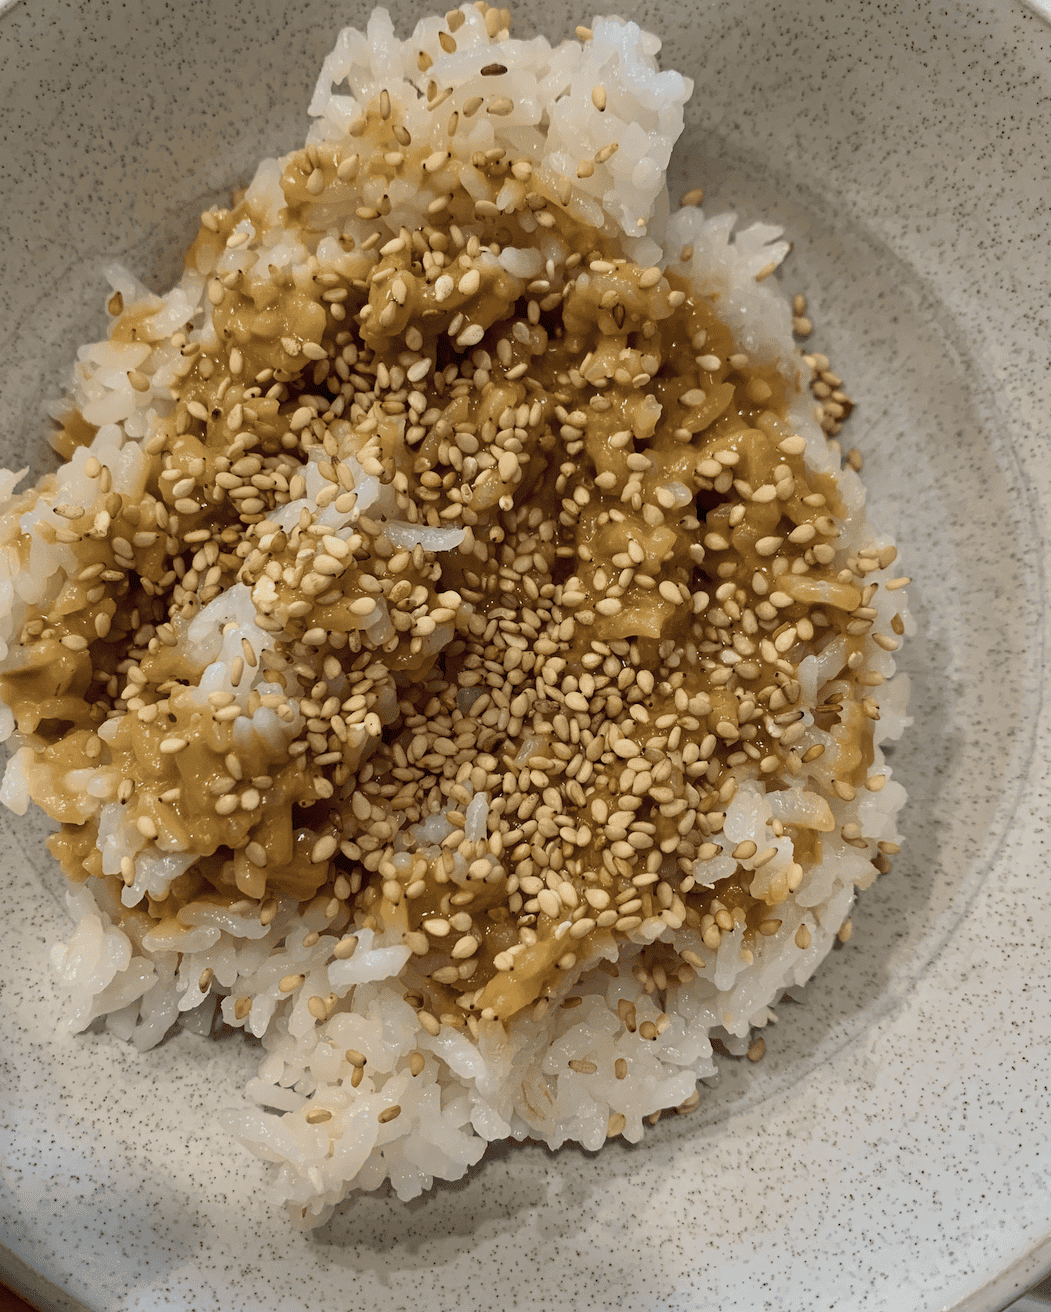 Steamed white rice in a bowl with nutritional yeast dressing and toasted sesame seeds on top.